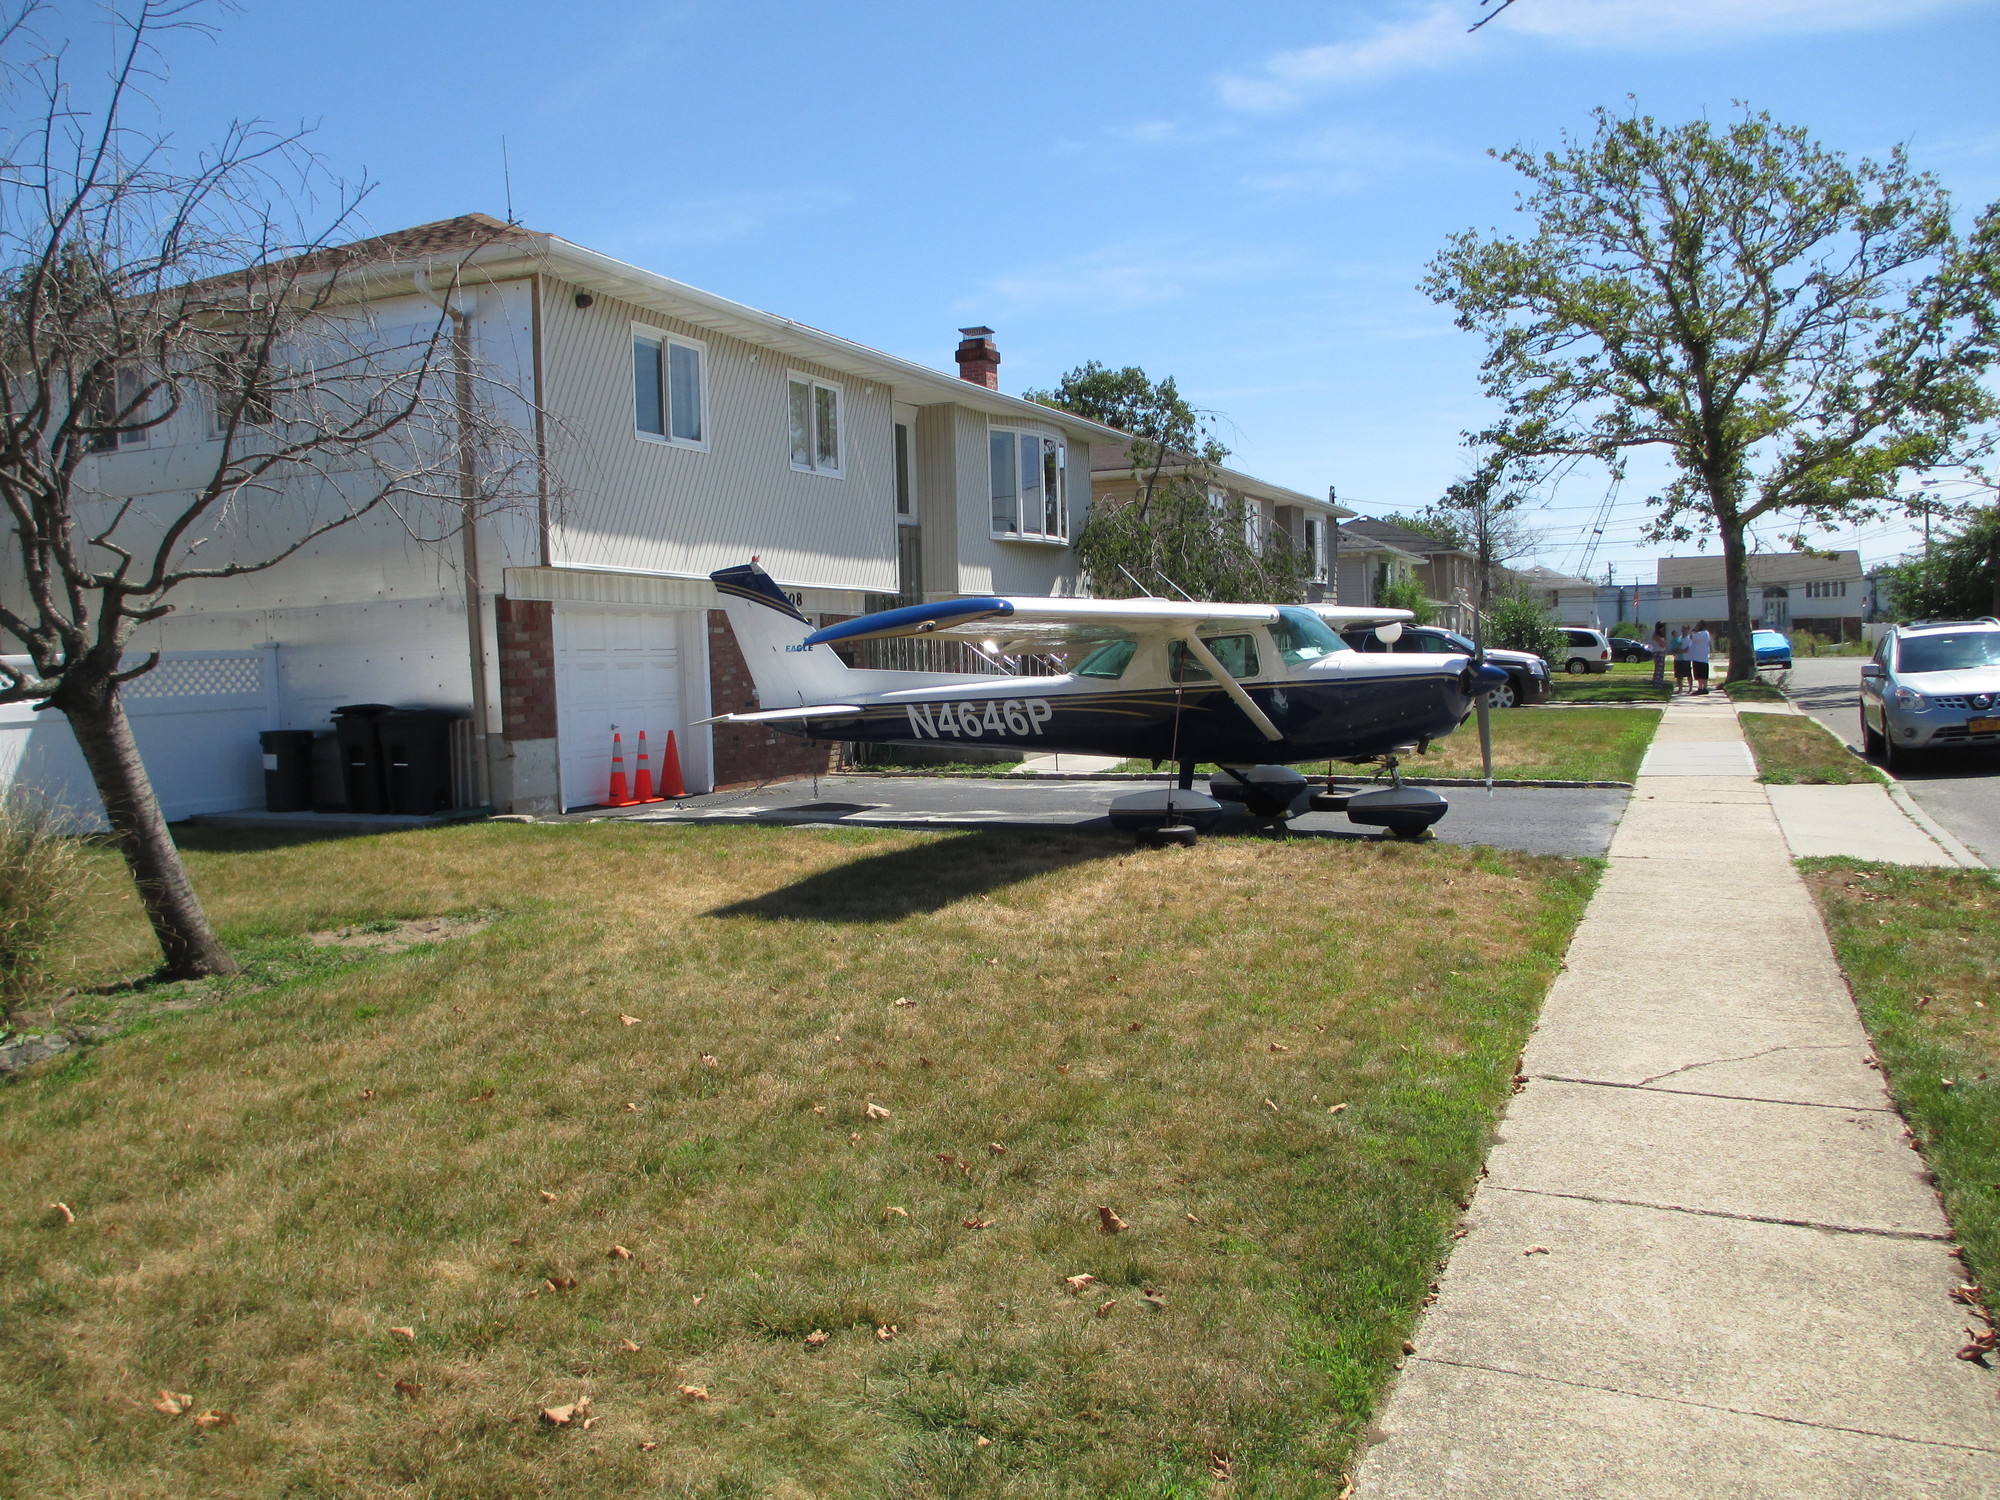 Harold Guretzky’s Cessna 152 parked on his Oceanside Driveway. (Courtesy Robert Perry)